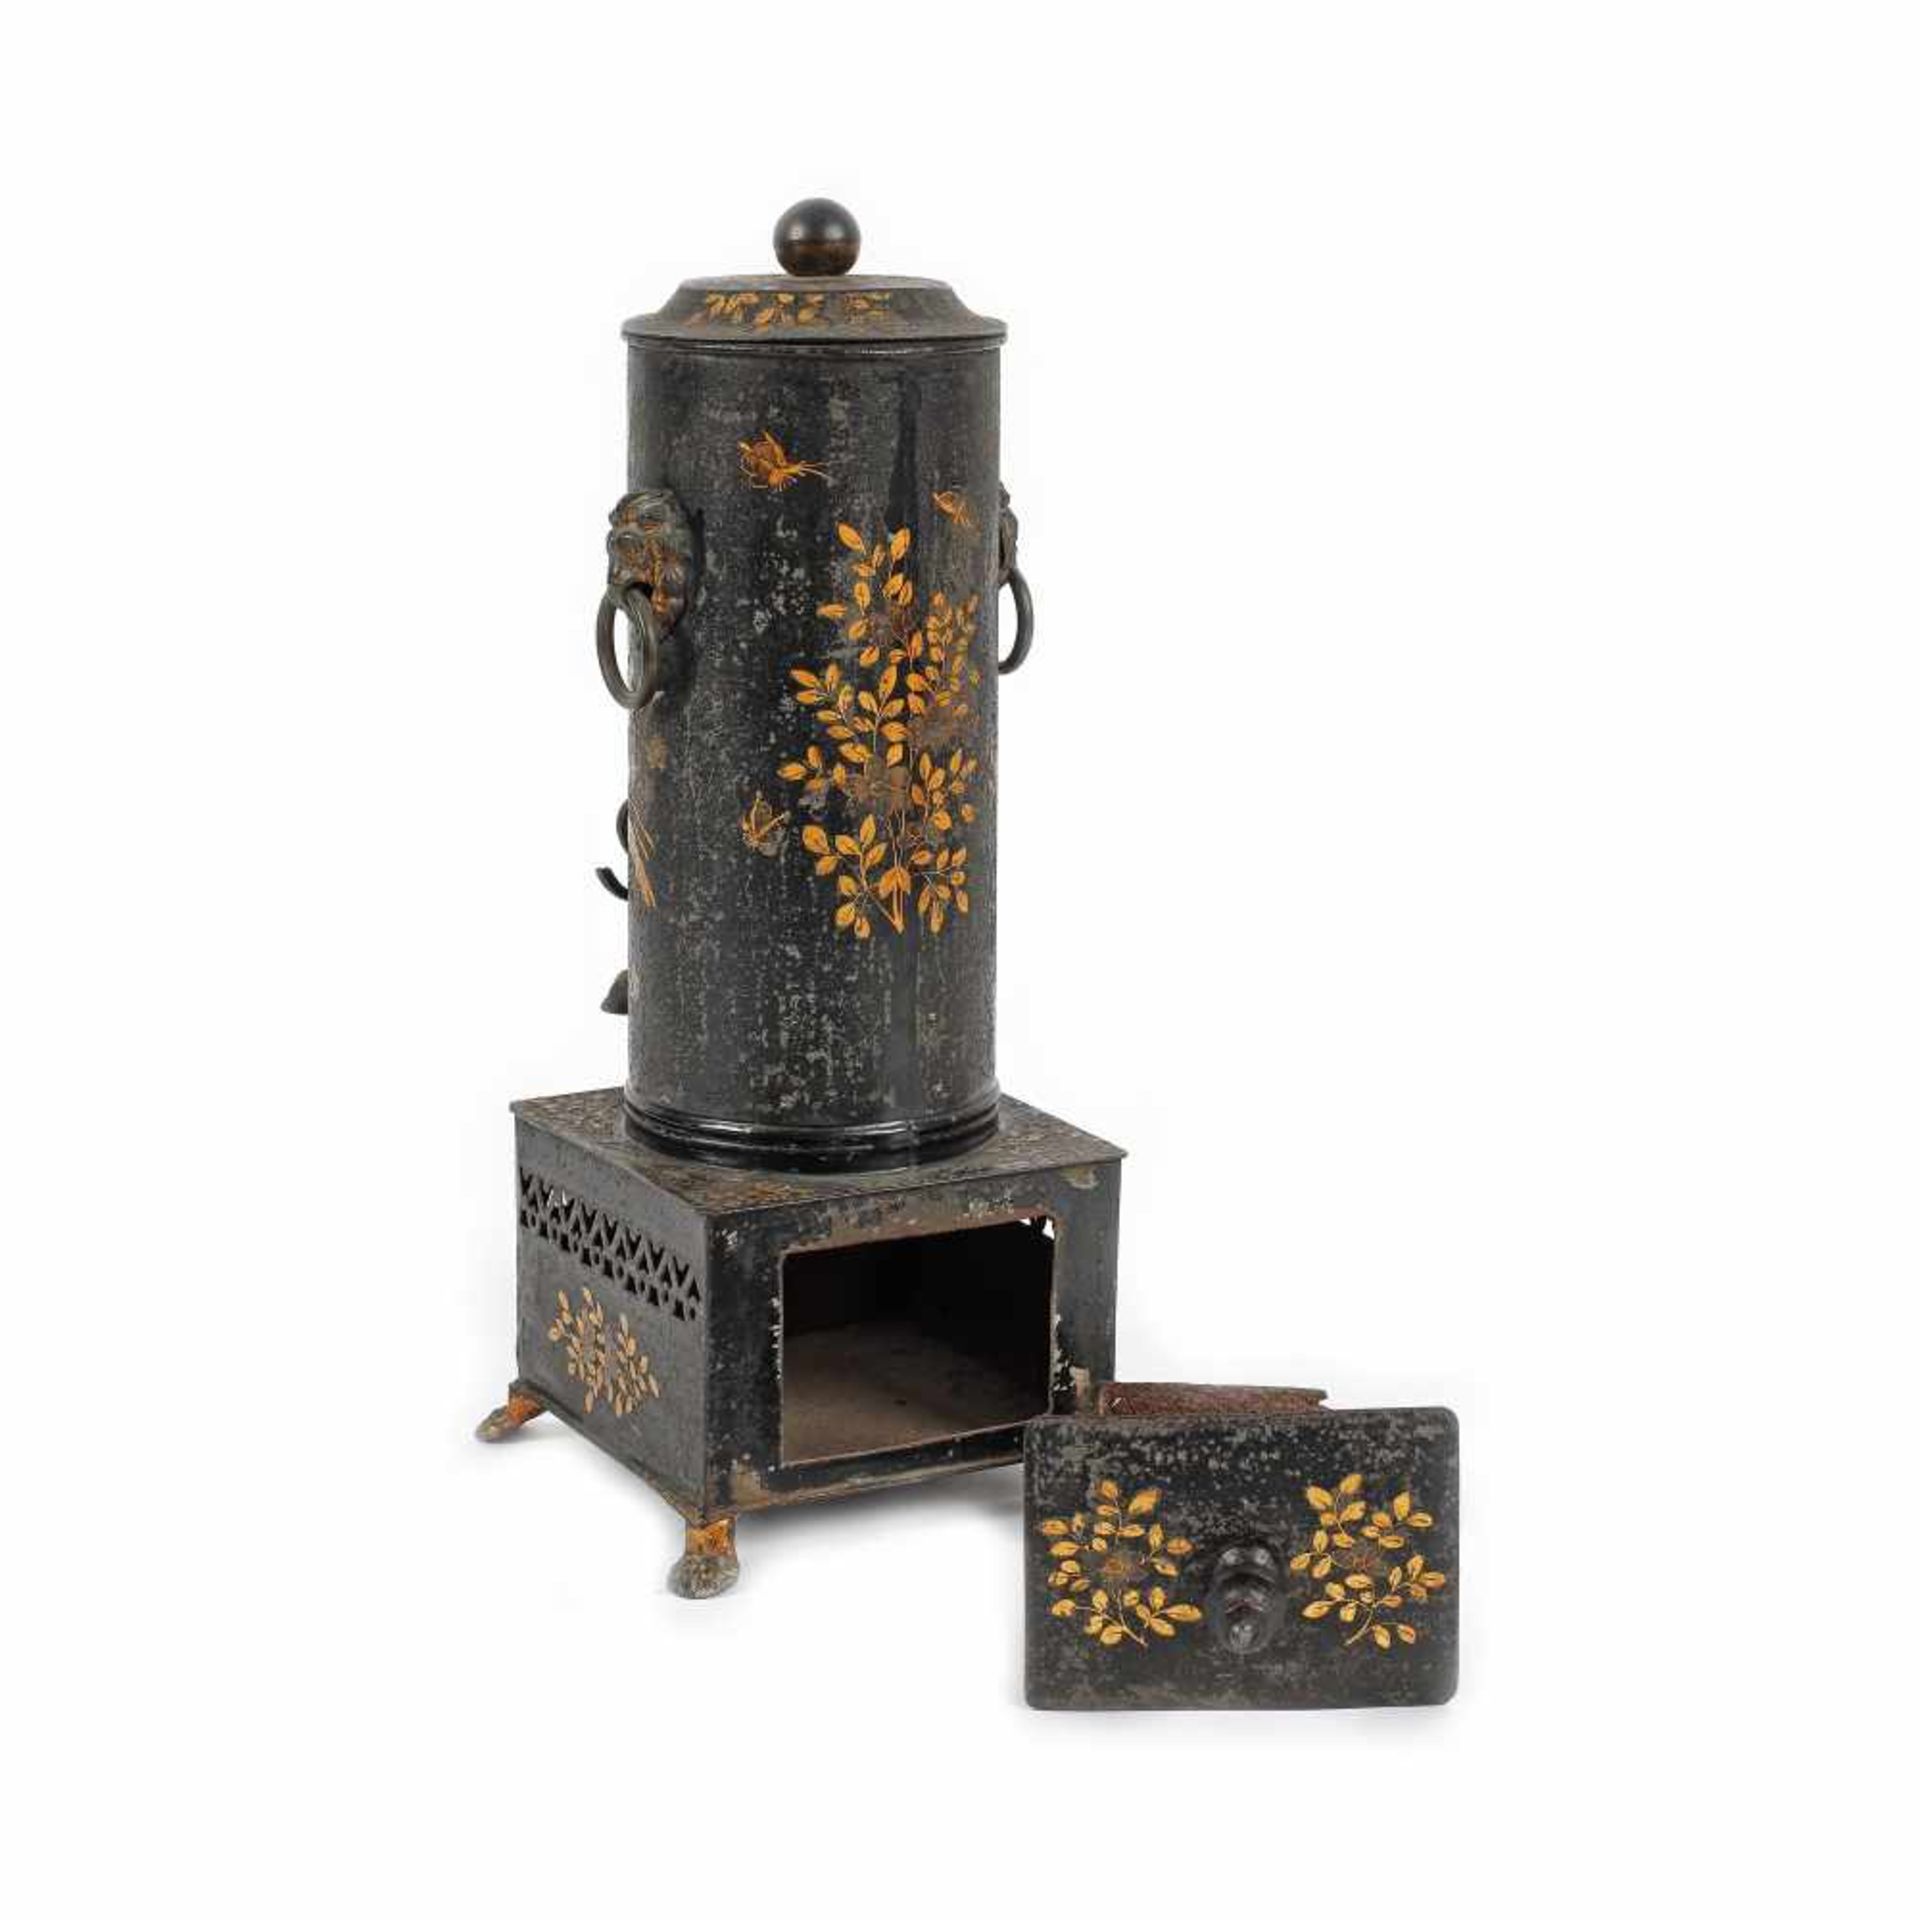 Coffee maker decorated with floral motifs, possibly France, early 20th century - Image 3 of 3